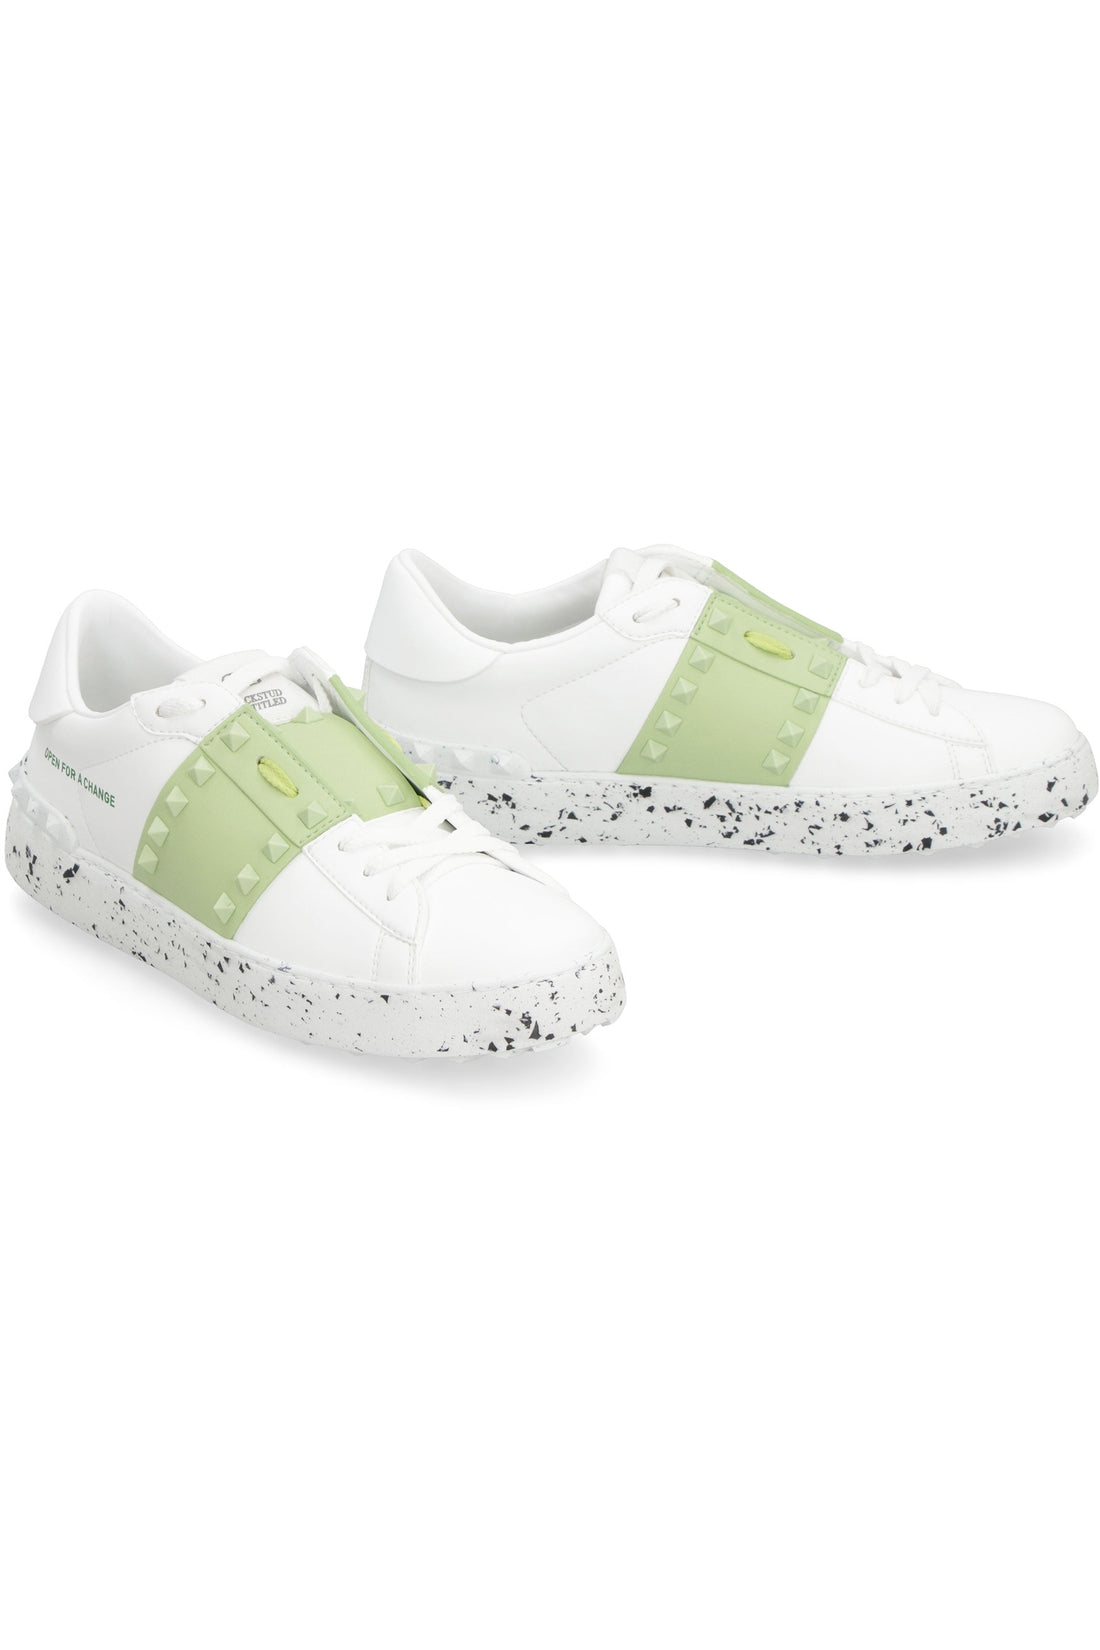 Valentino-OUTLET-SALE-Valentino Garavani - Open for a Change low-top sneakers-ARCHIVIST